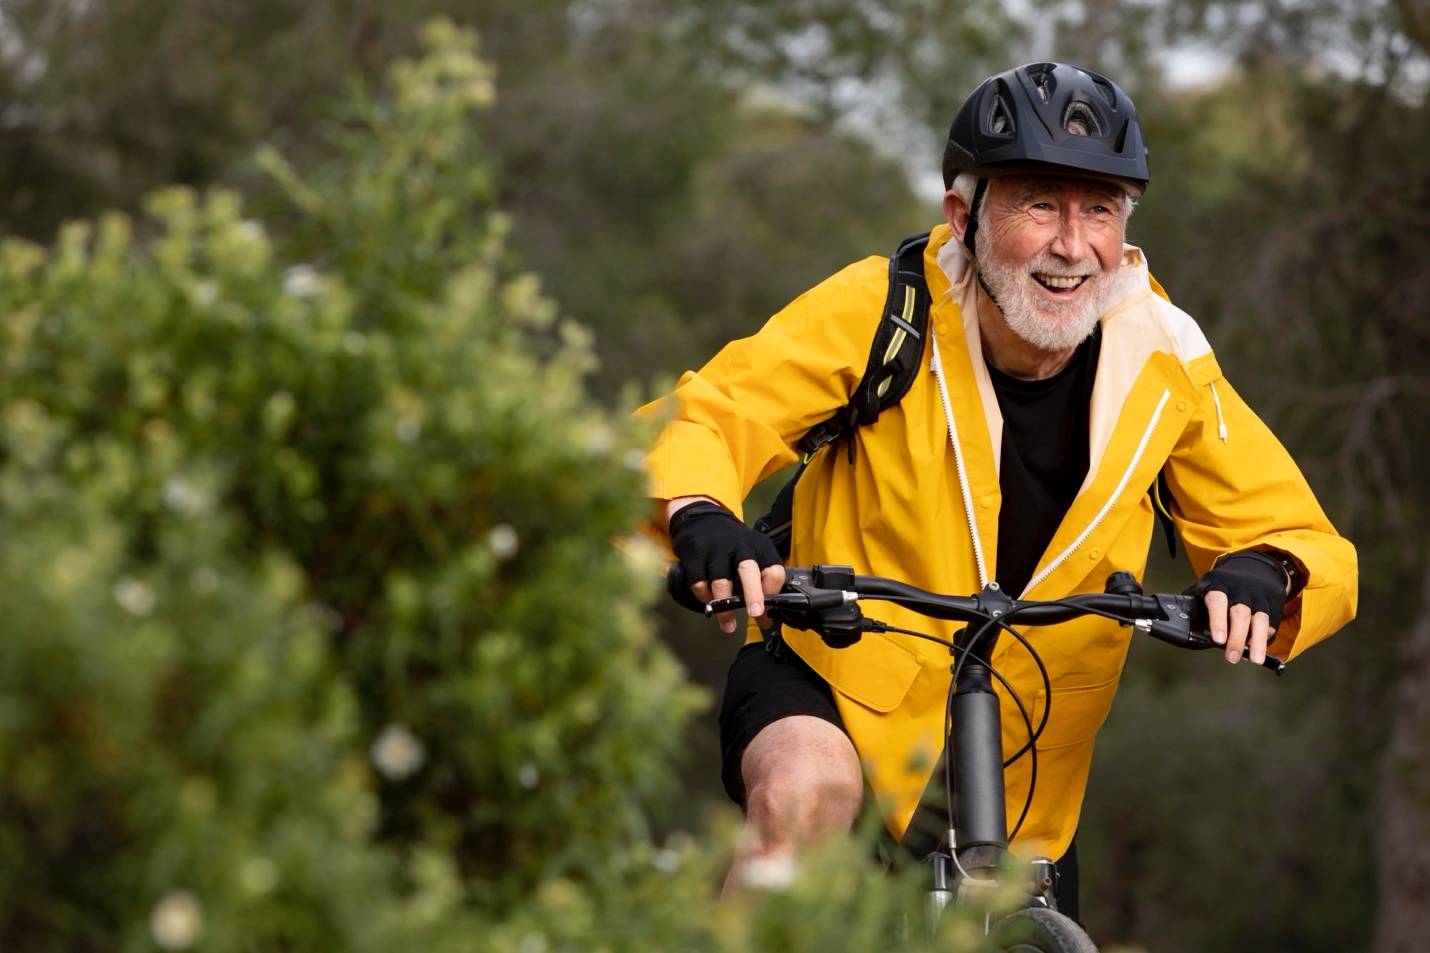 Elderly man on a bicycle wearing a yellow jacket